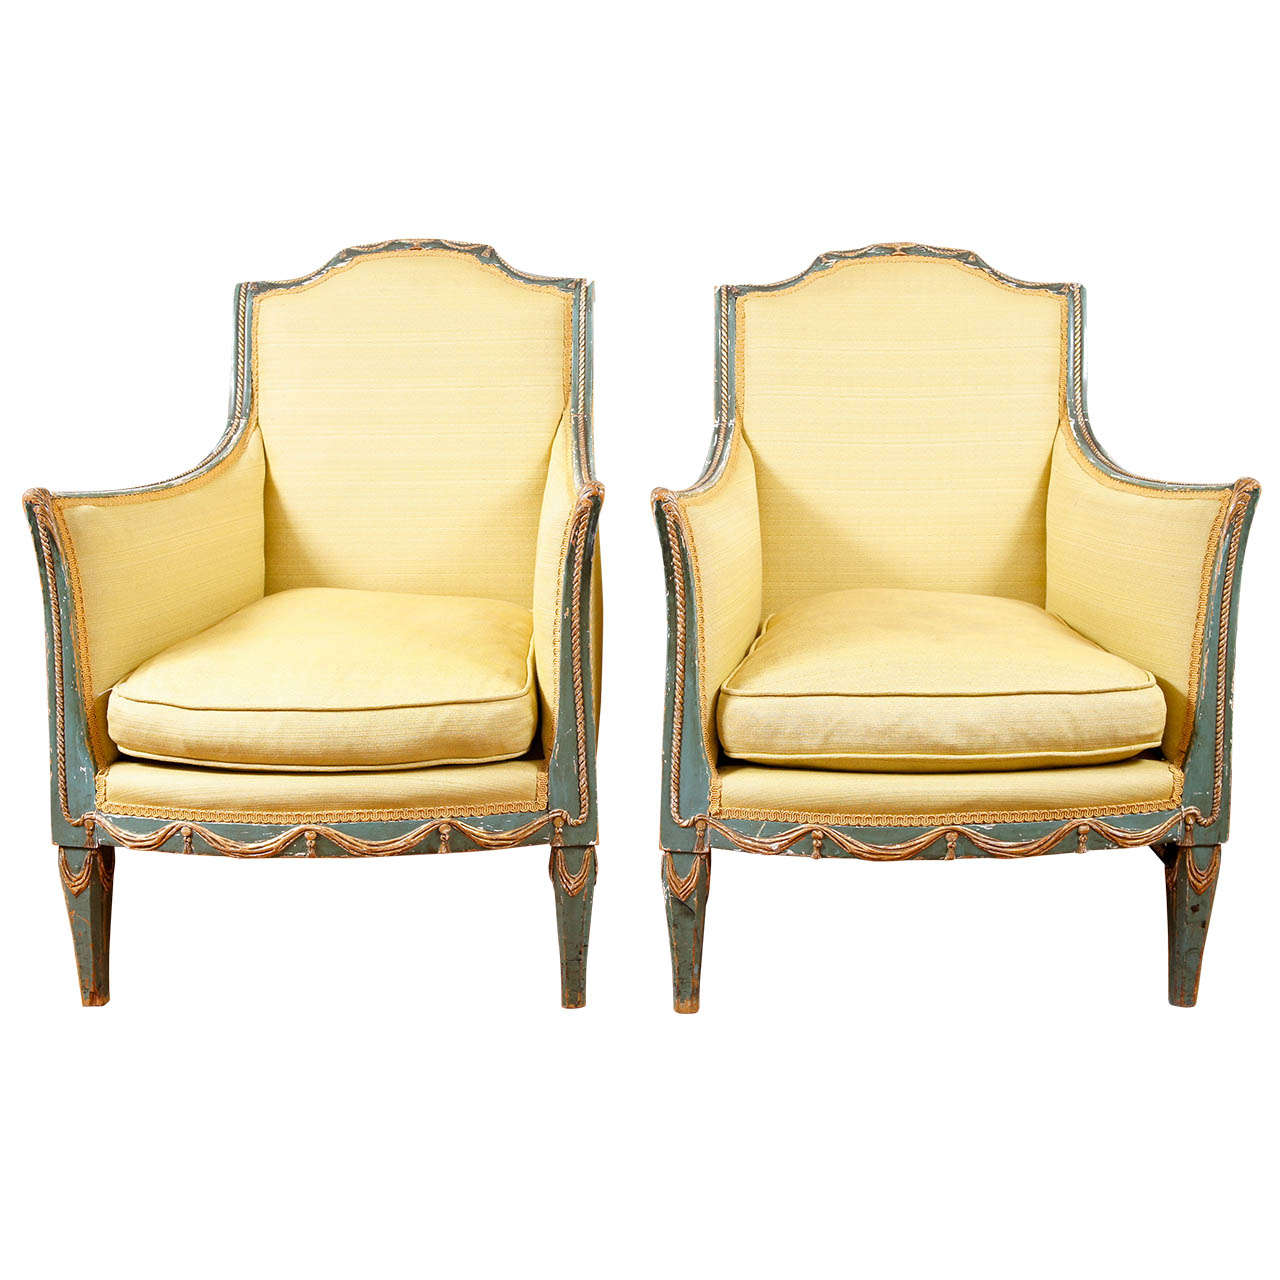 Pair of Green Italian Neoclassical Style Painted and Parcel-Gilt Armchairs For Sale